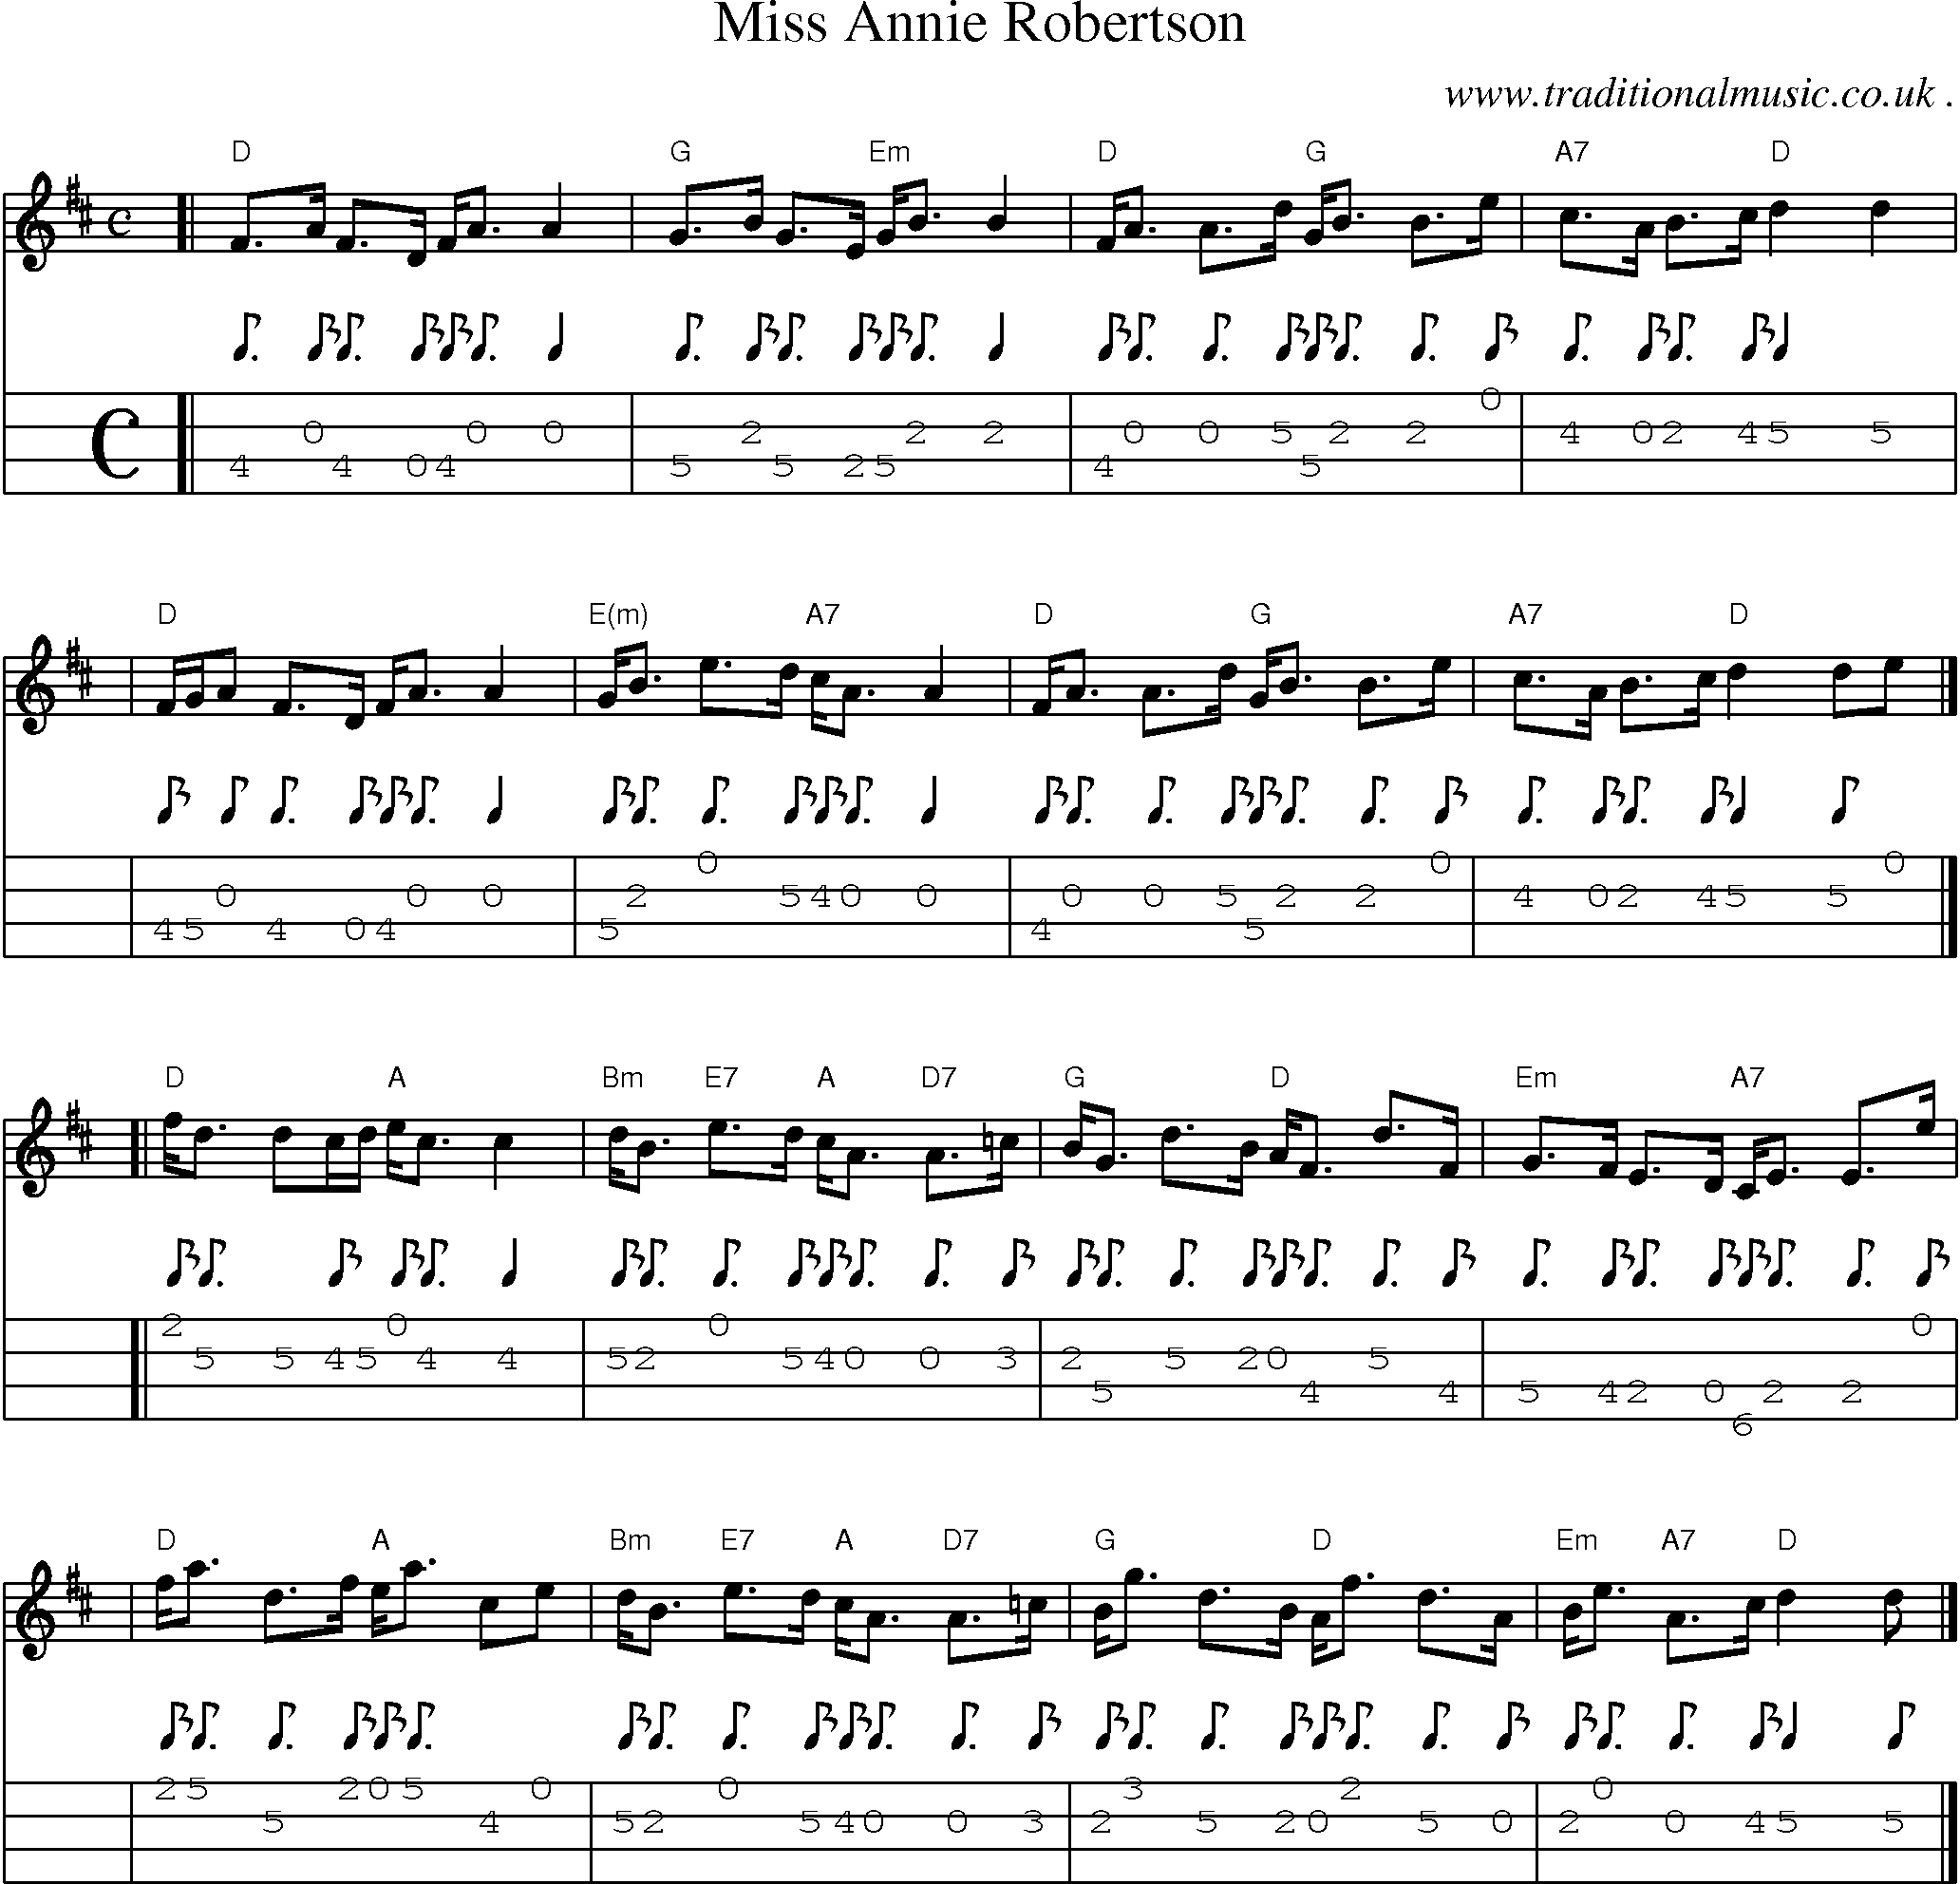 Sheet-music  score, Chords and Mandolin Tabs for Miss Annie Robertson